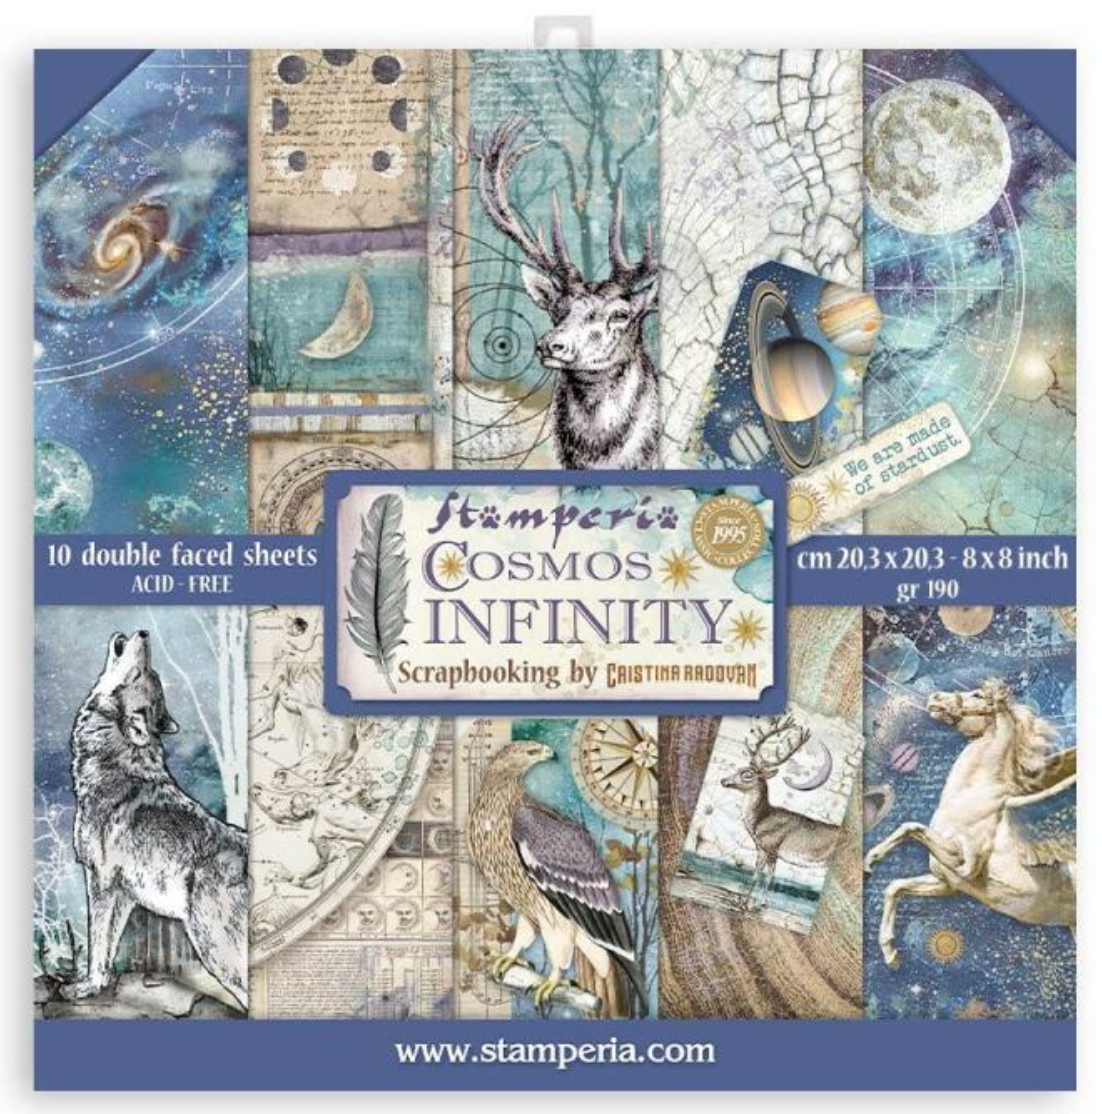 Cosmos Infinity - Scrapbooking Pad 8x8 Inch - Stamperia